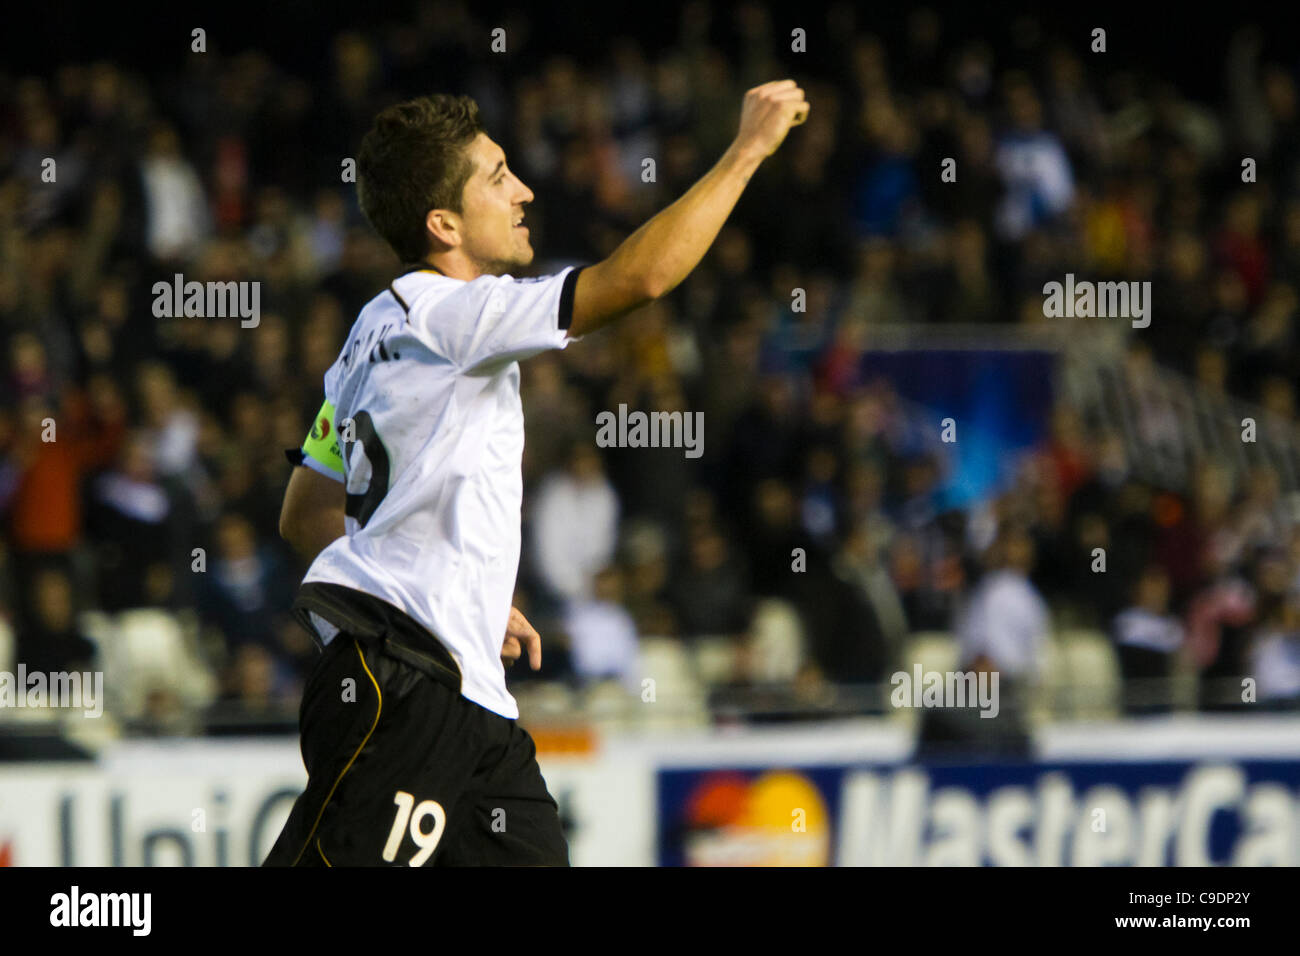 23/11/2011. Valencia, Spain  Football match between Valencia Club de Futbol and KRC Genk, Matchday 5, E Group, Champions League -------------------------------------  Pablo Hernandez celebrates his goal, number 5 for Valencia CF against KRC Genk Stock Photo